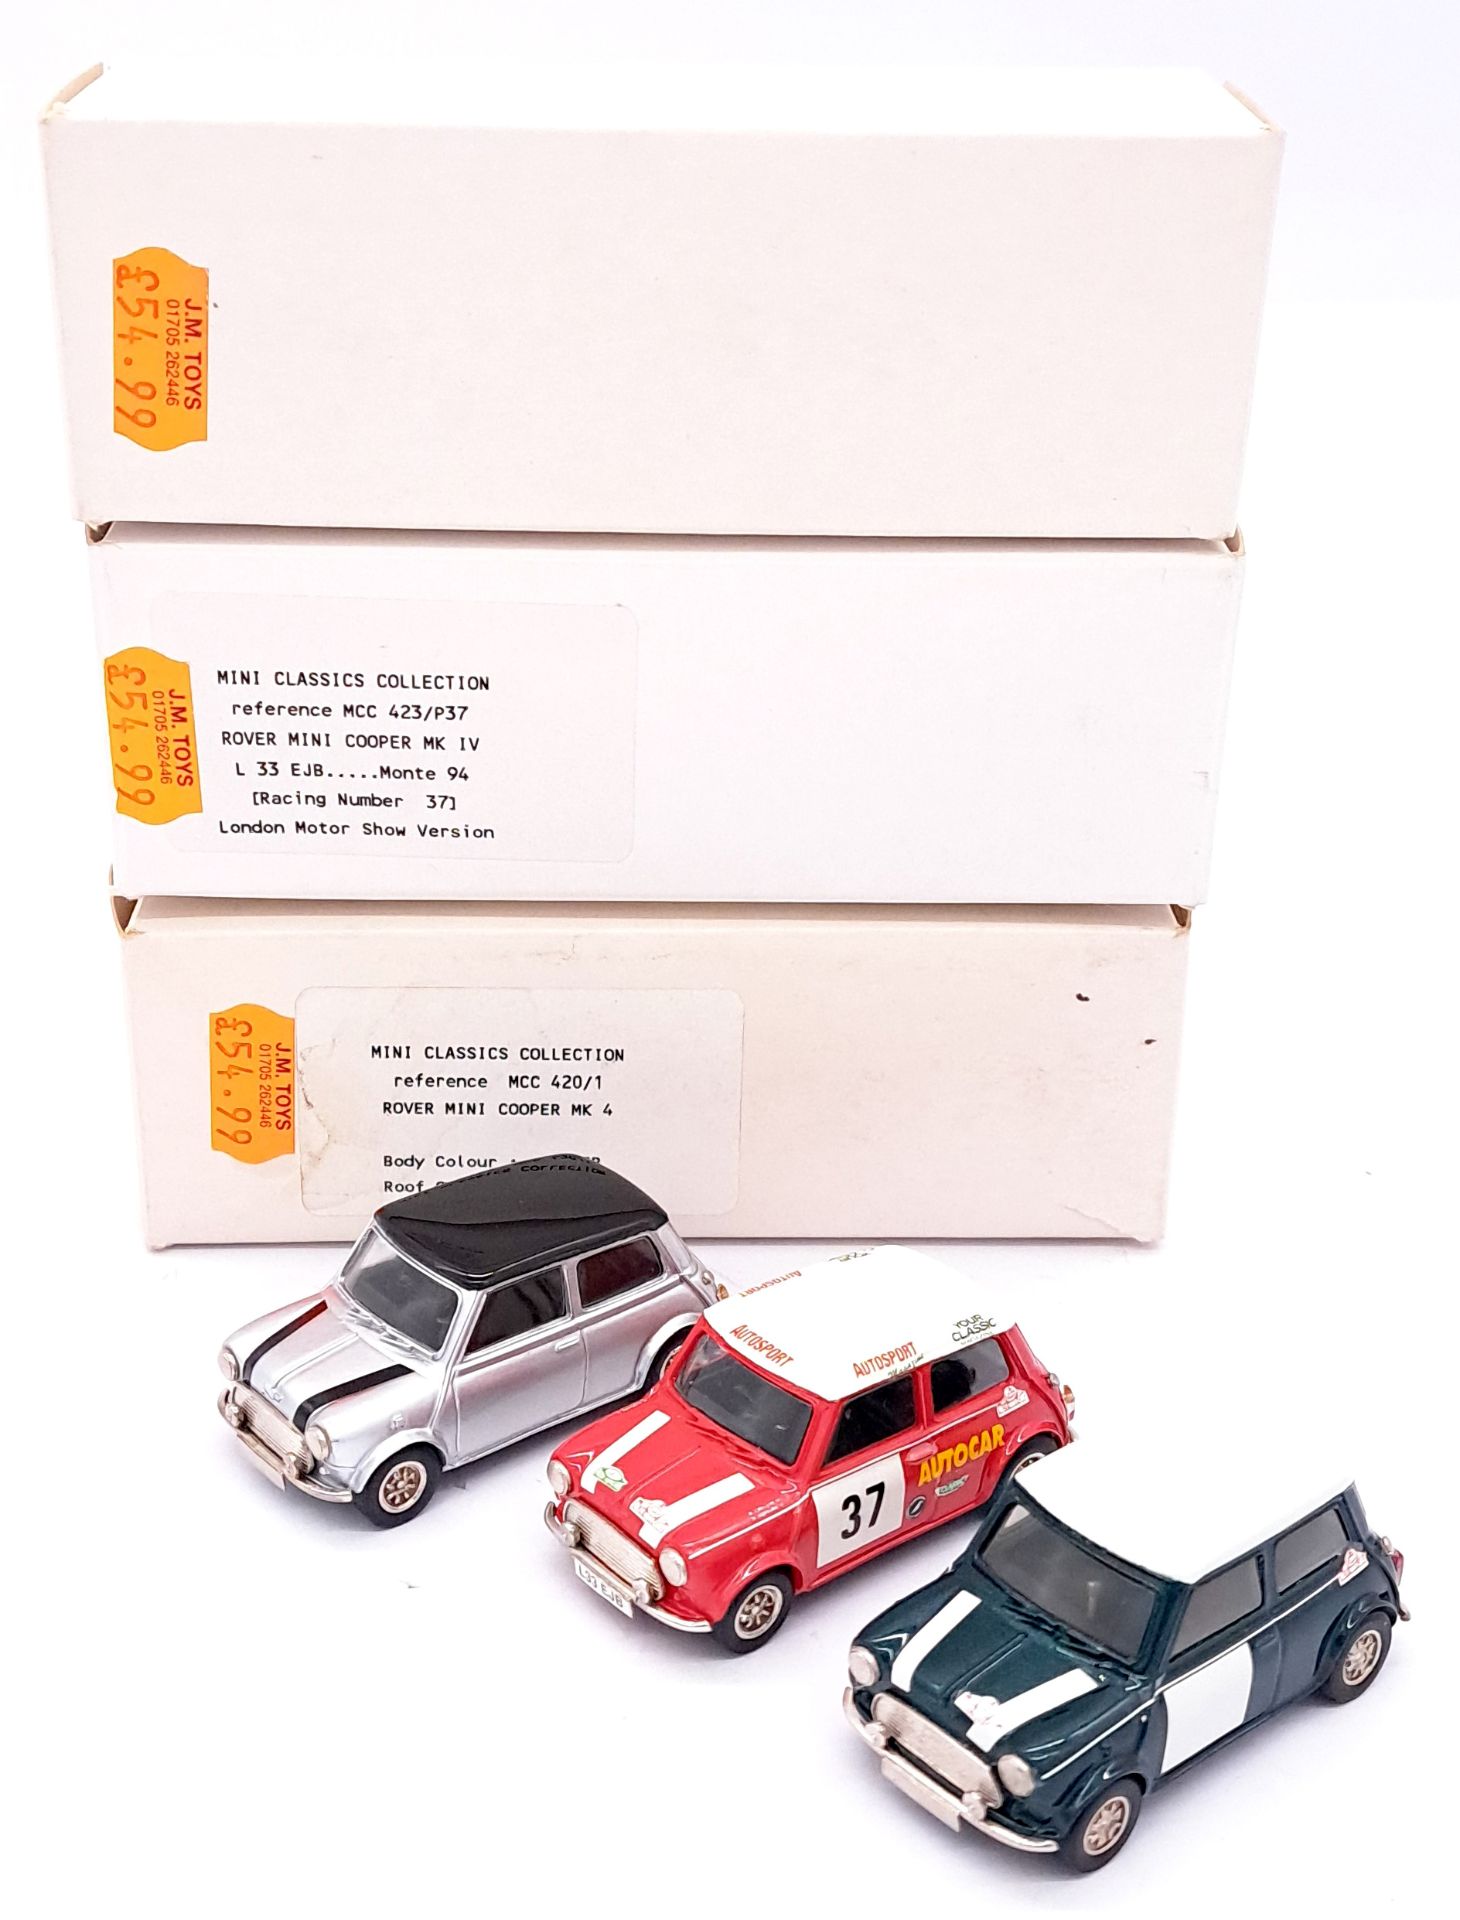 Mini Classics Collection, a boxed group of Mini Cooper white metal models - Image 6 of 6